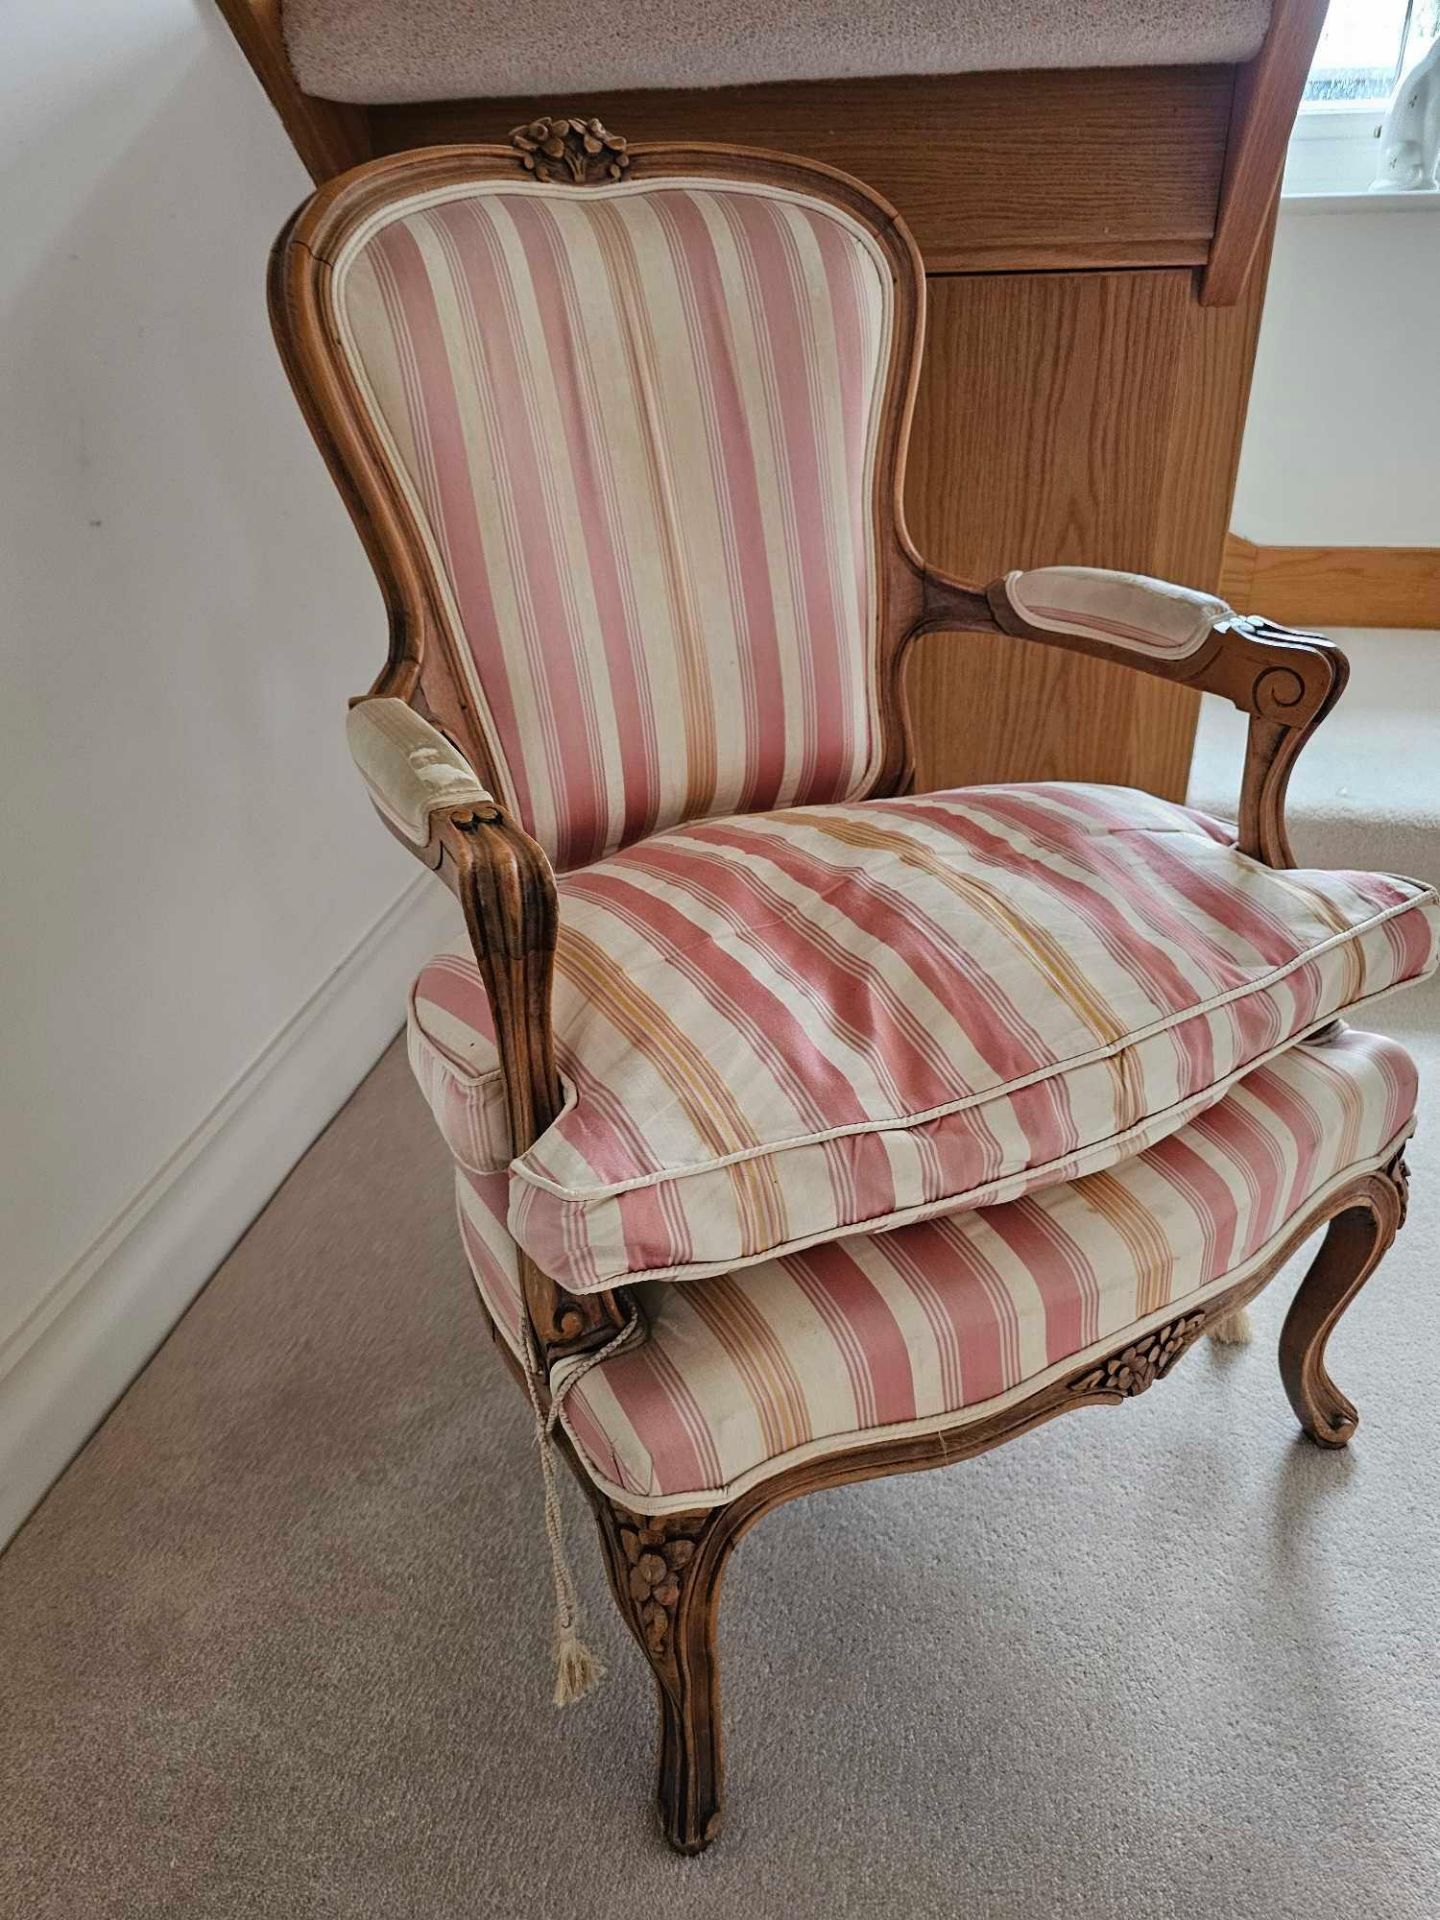 A Louis XV Style Beechwood Fauteuil The Shaped Rectangular Back With Floral Cresting, Striped - Image 2 of 5